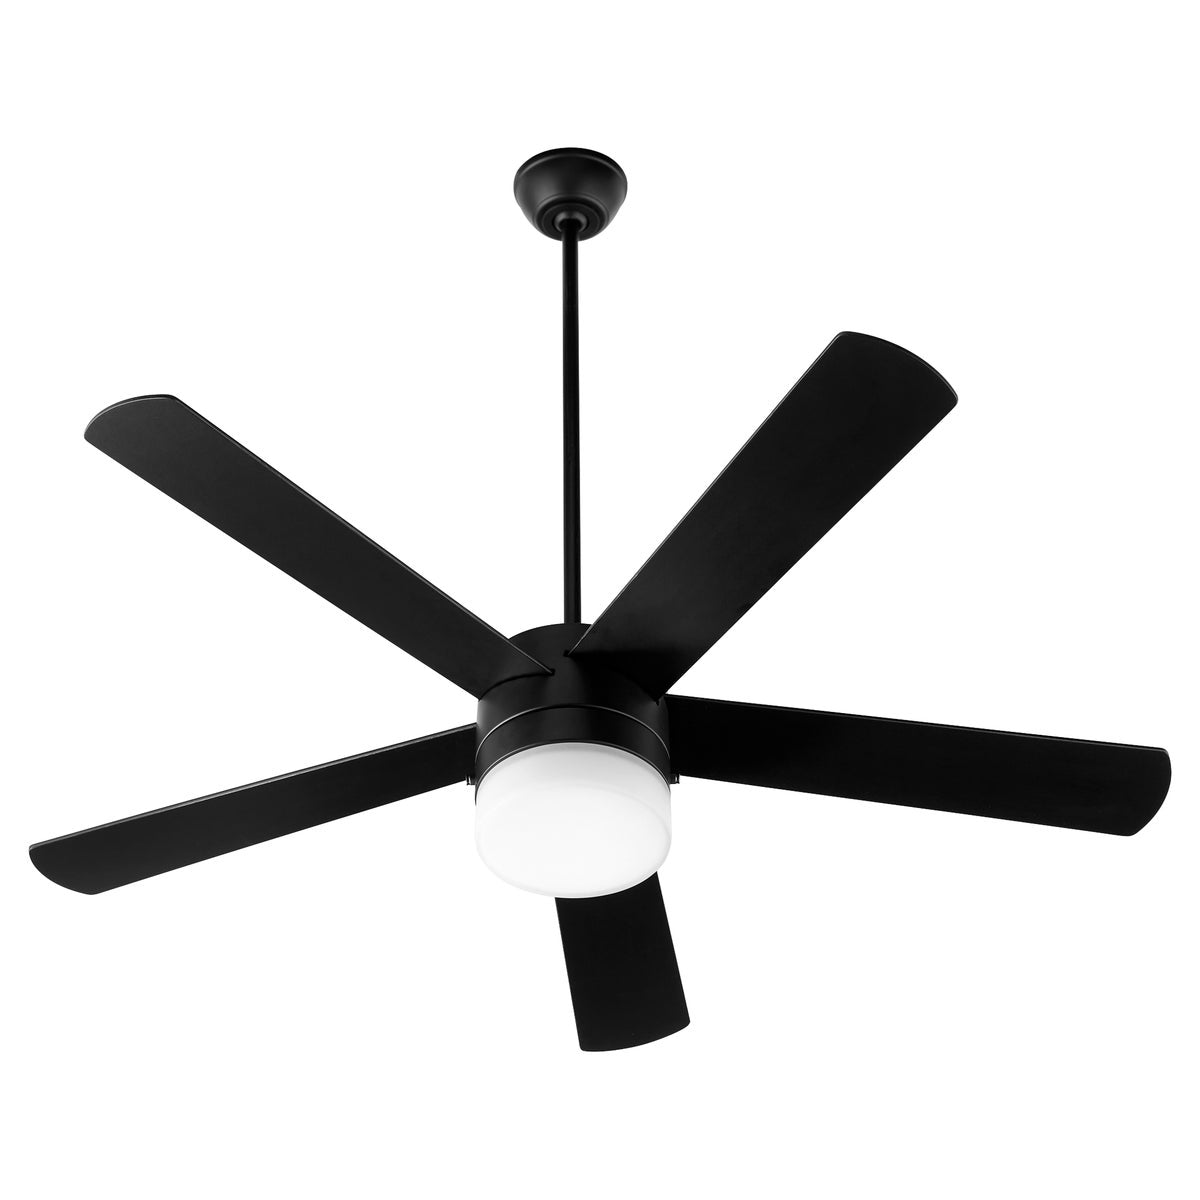 A mid century modern ceiling fan with a light, featuring a clean monochrome finish on the housing, motor, and blades. The five-blade system provides efficient air circulation, while the translucent lighting shade adds an elegant touch. Perfect for delivering cooling comfort to your home.